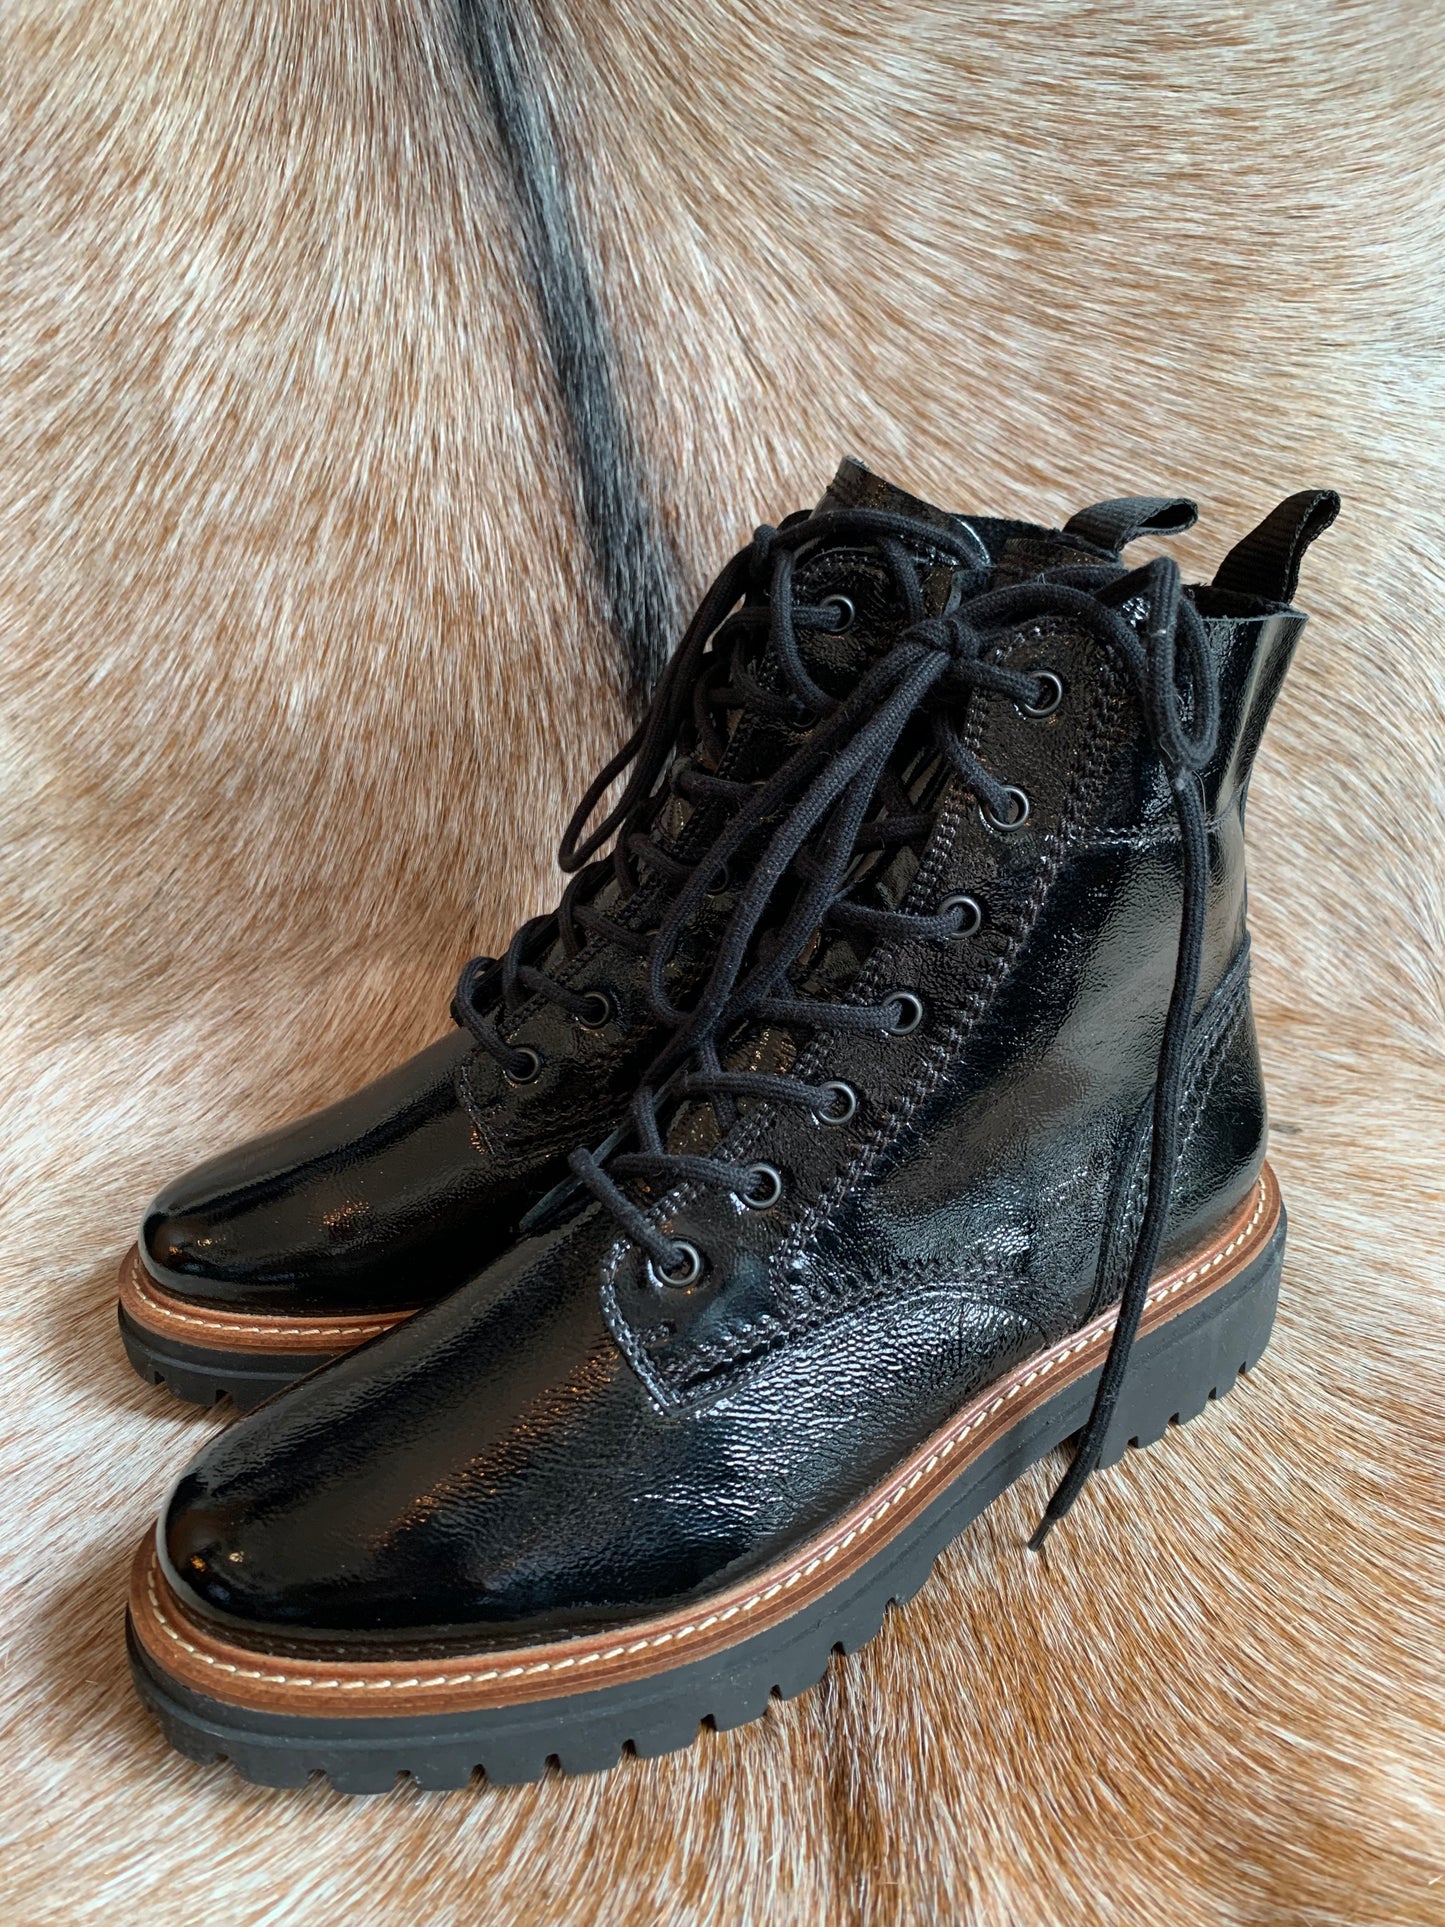 Black and Brown Paul Green Patent Lace-up Combat Boots